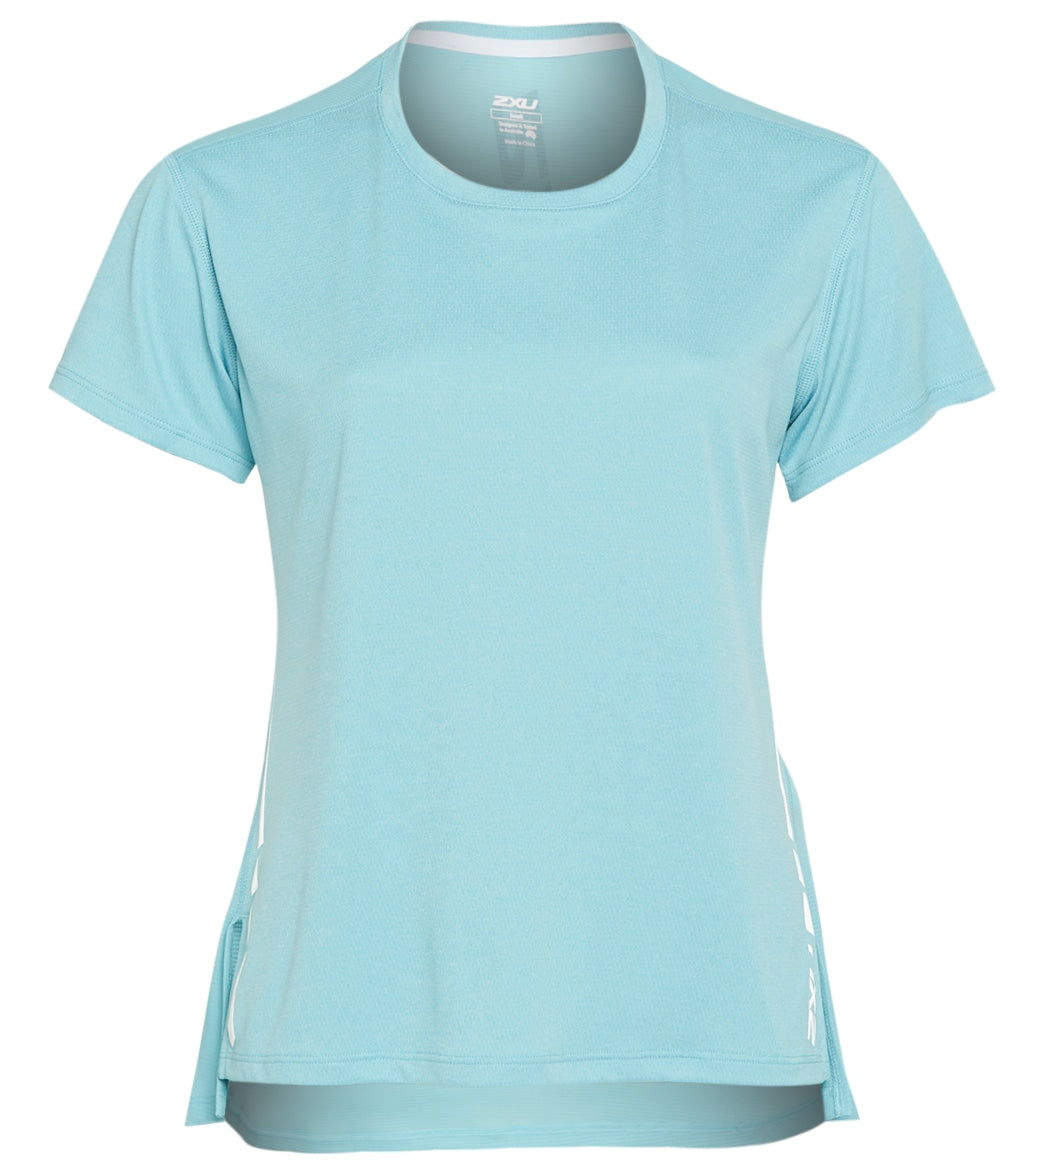 2Xu Women's Xvent G2 Short Sleeve Top - Bluejay/White Reflective Large Polyester - Swimoutlet.com